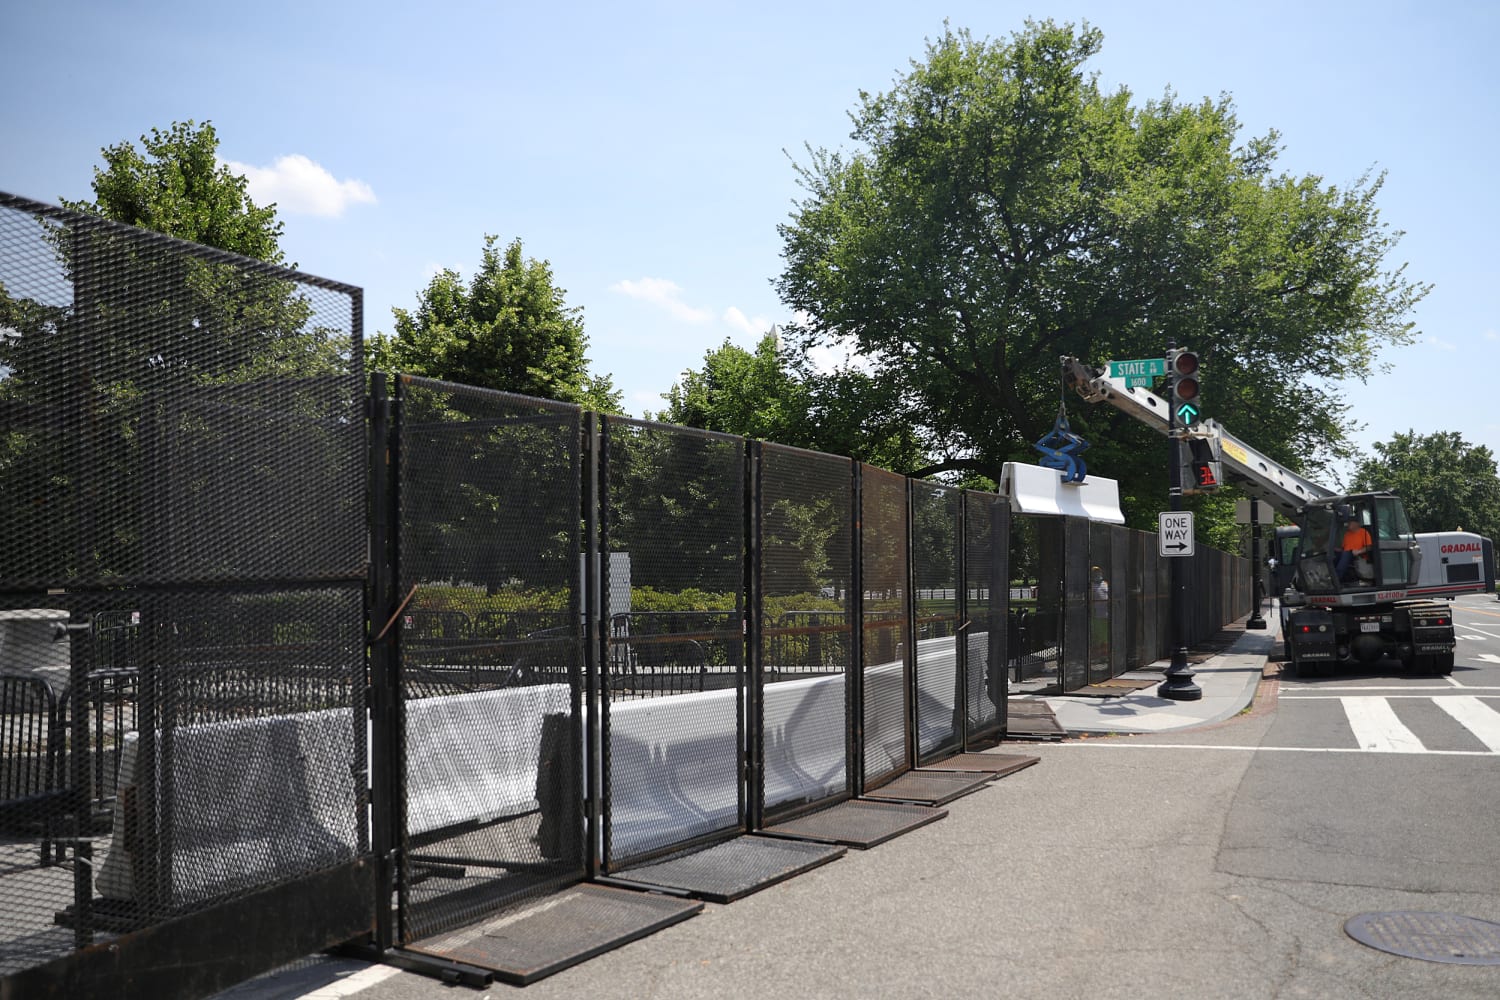 White House adds fencing around perimeter